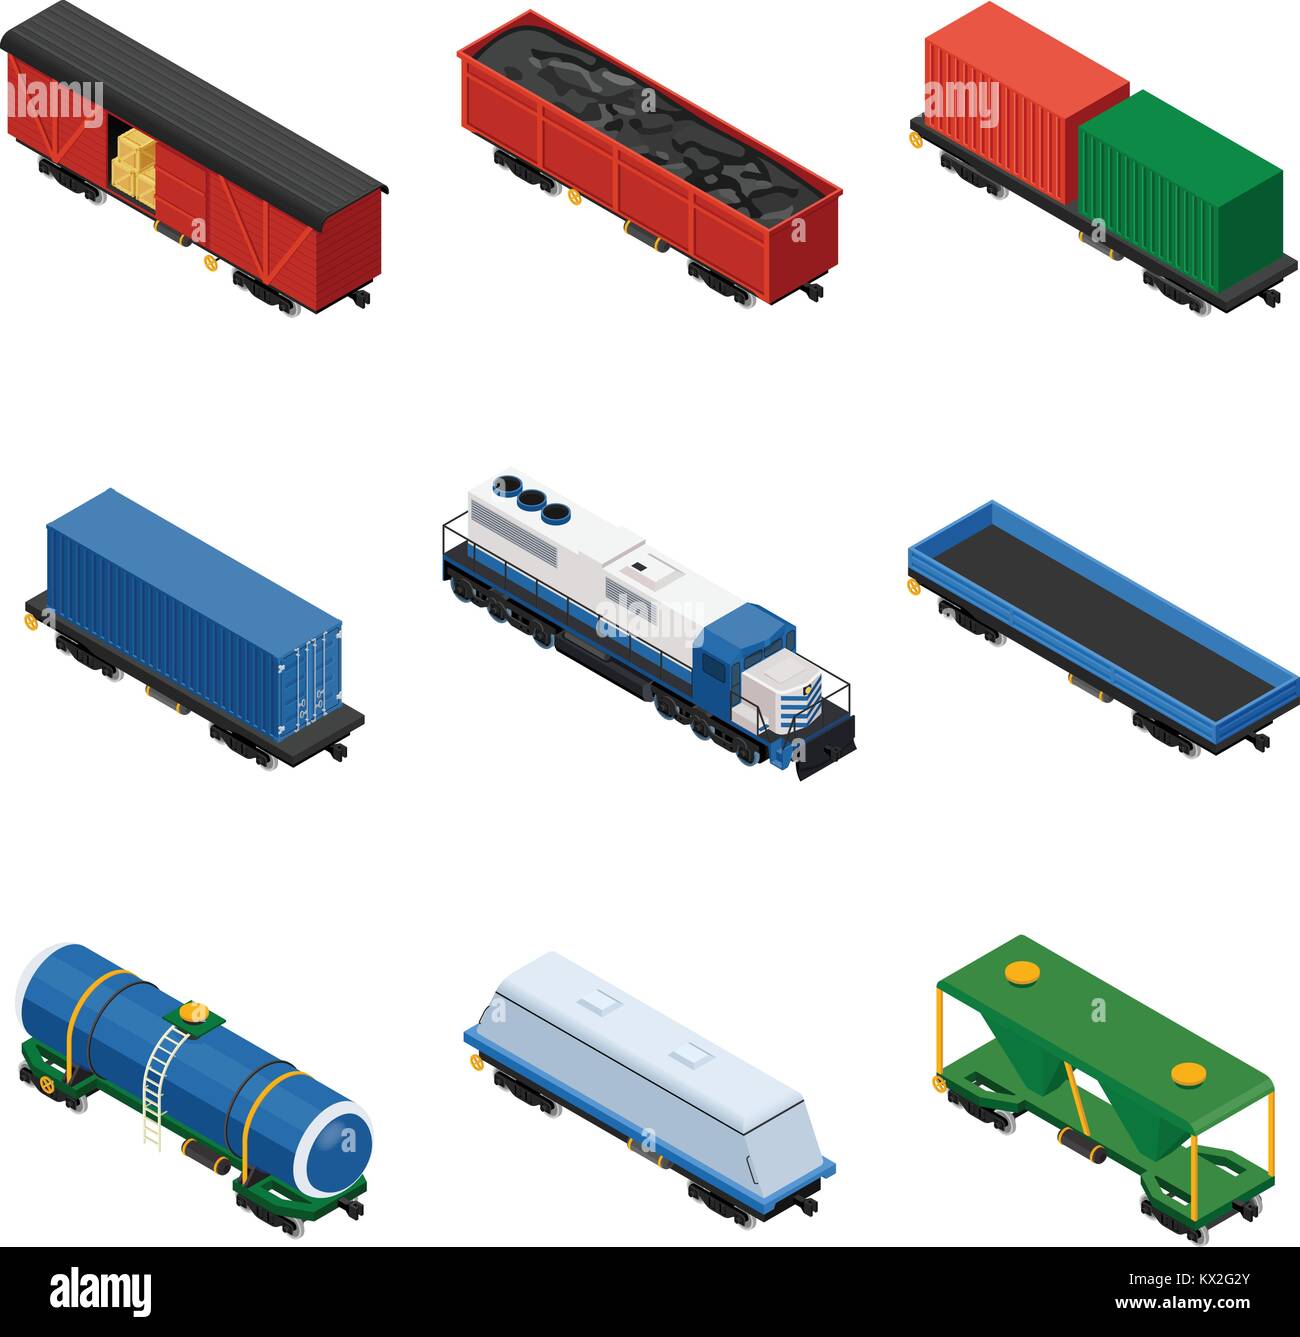 Trains isometric set of freight trains consisting of locomotives, platforms for transportation of containers, covered wagons, cisterns, and rail cars  Stock Vector